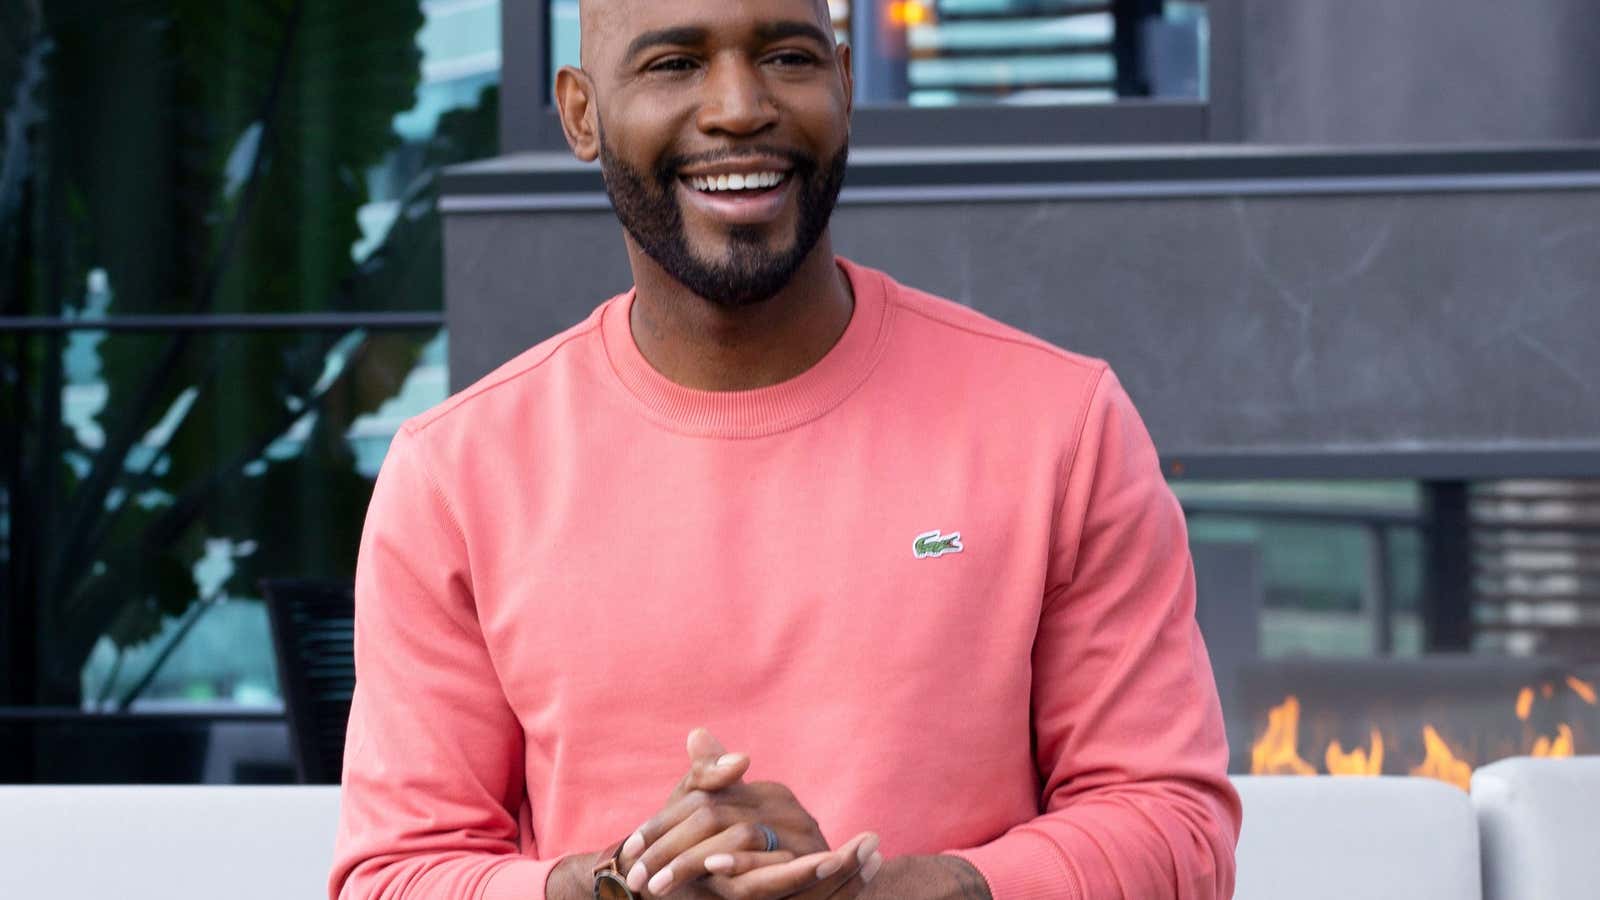 Why “Queer Eye” star Karamo Brown is anxious about his male privilege